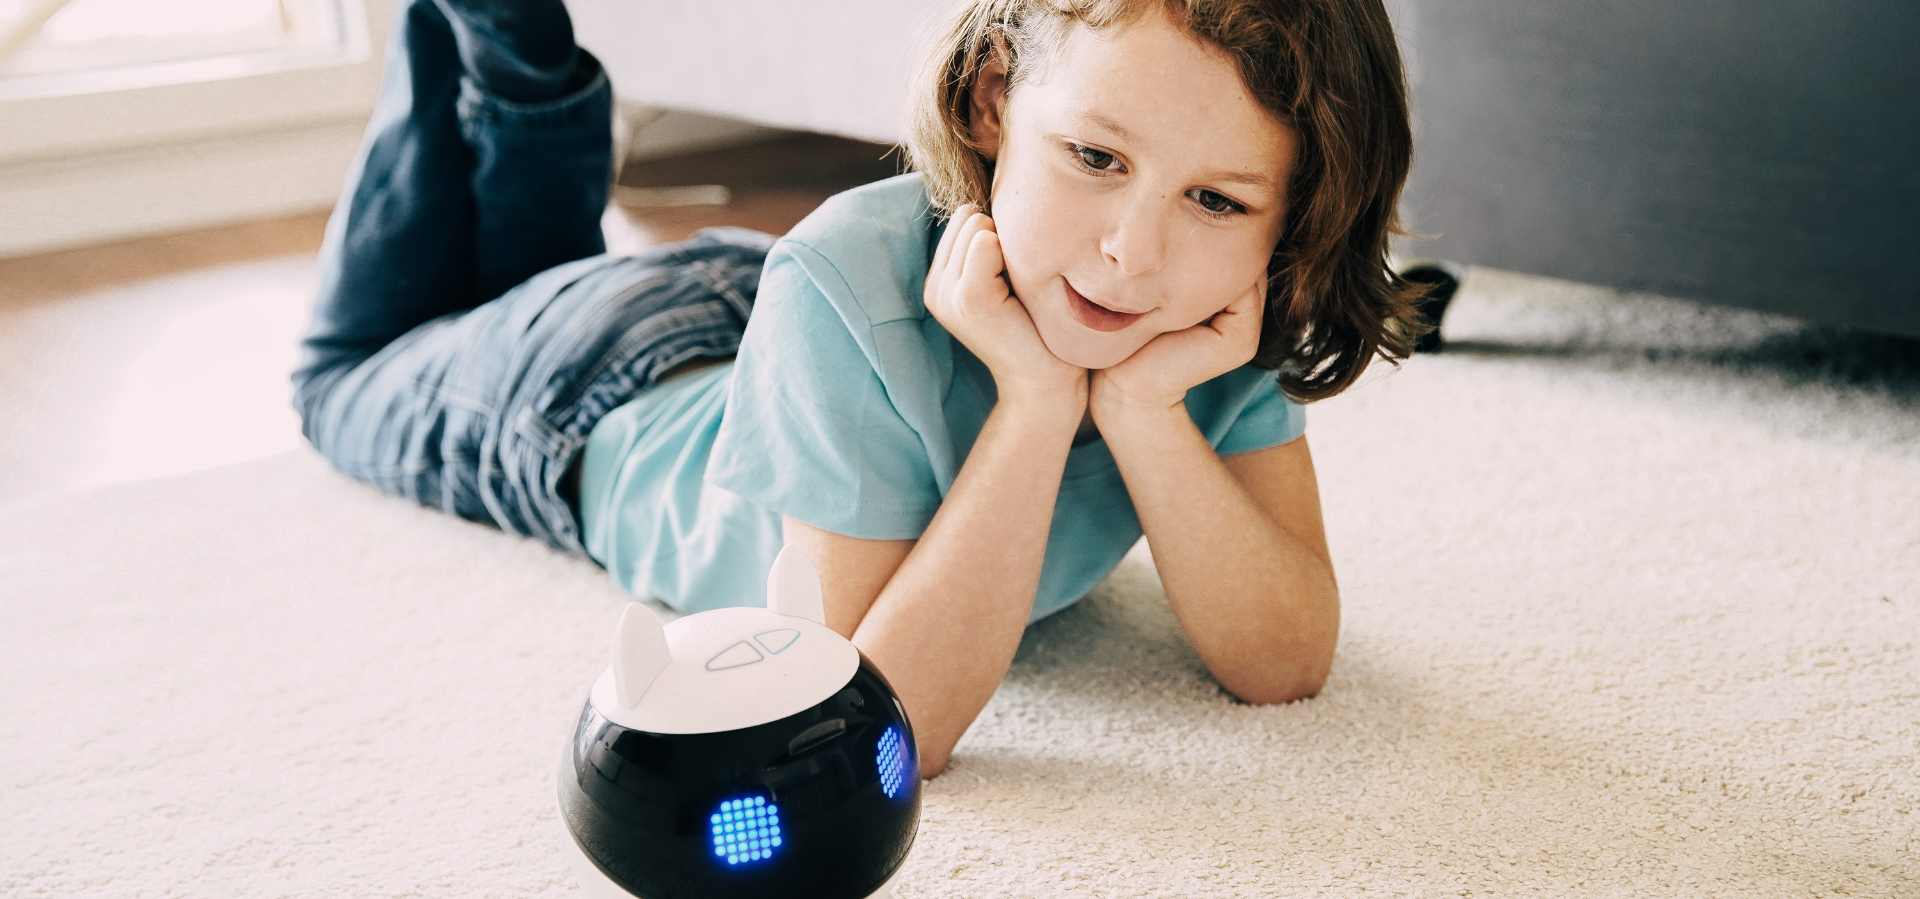 A robot for your kids, a companion for your whole family!